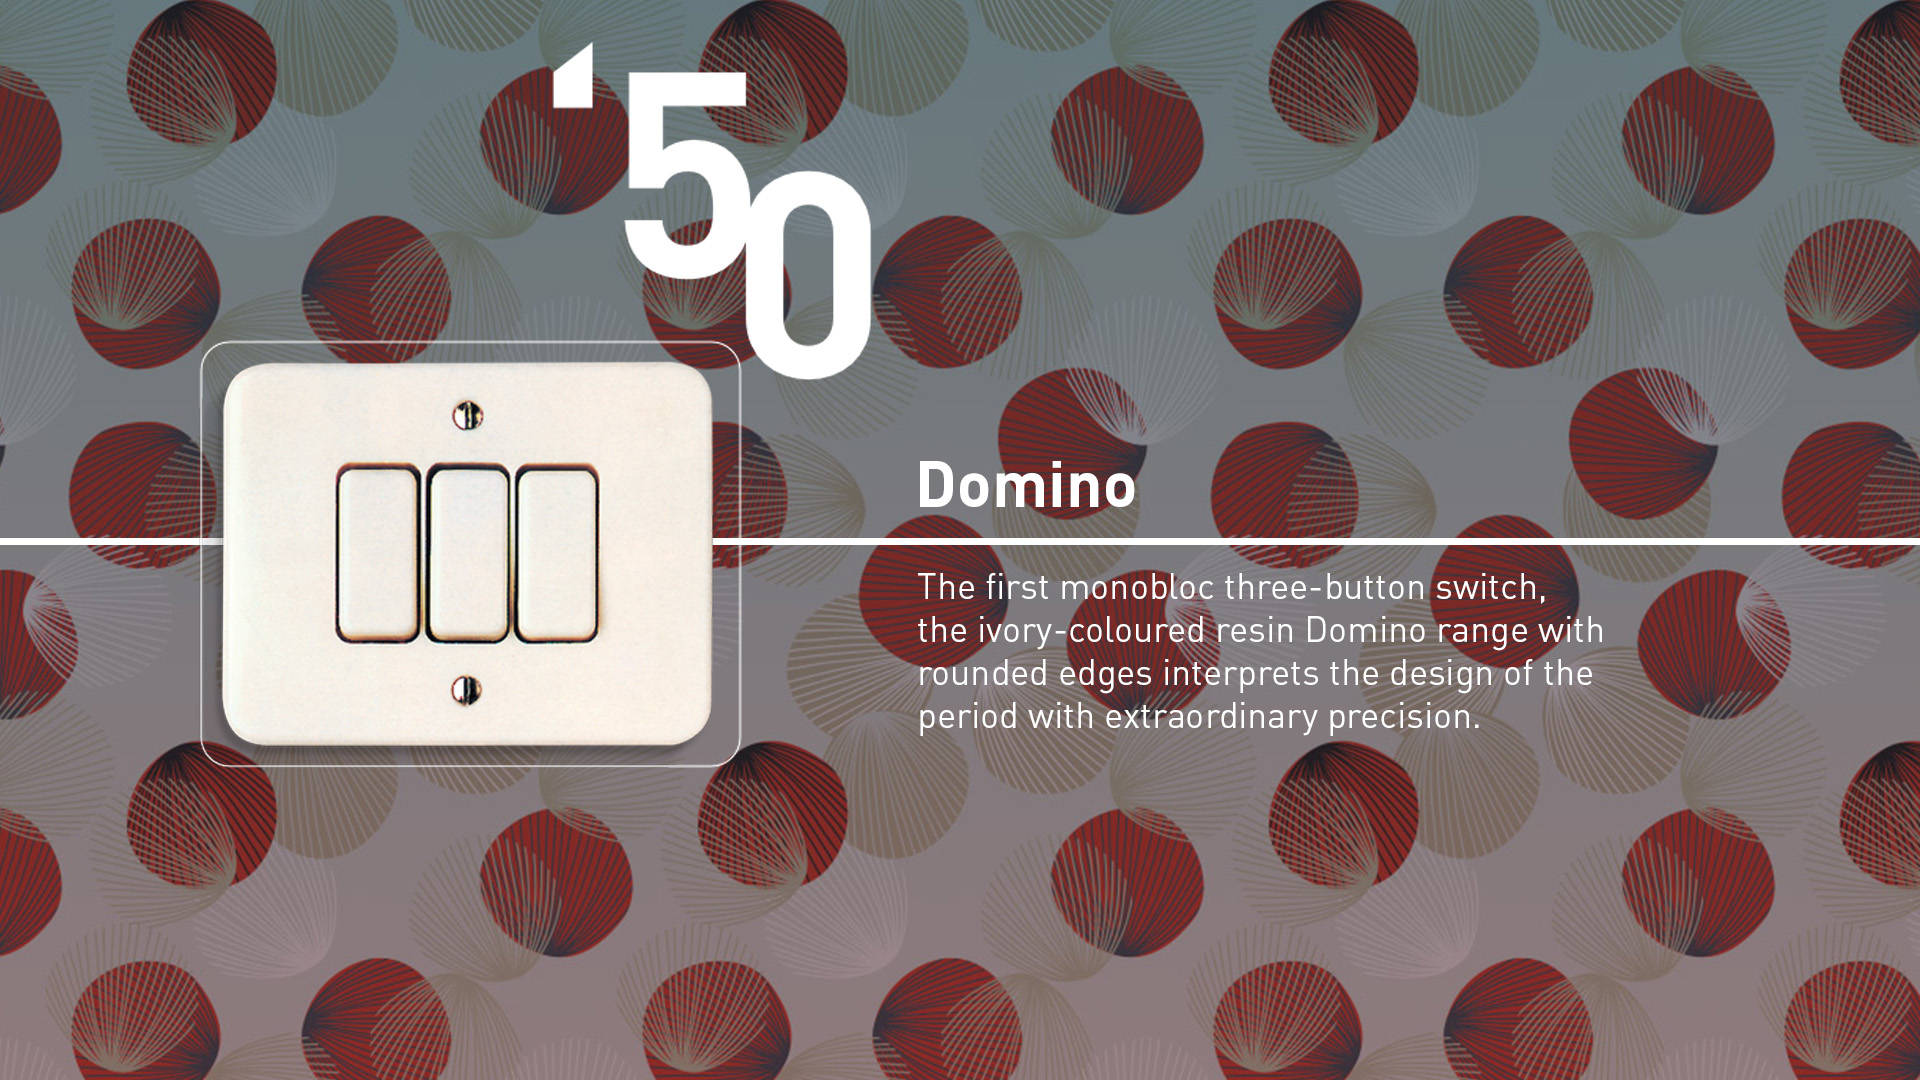 Domino (1950). The first monobloc three-button switch, ivory-coloured resin range with rounded edges.